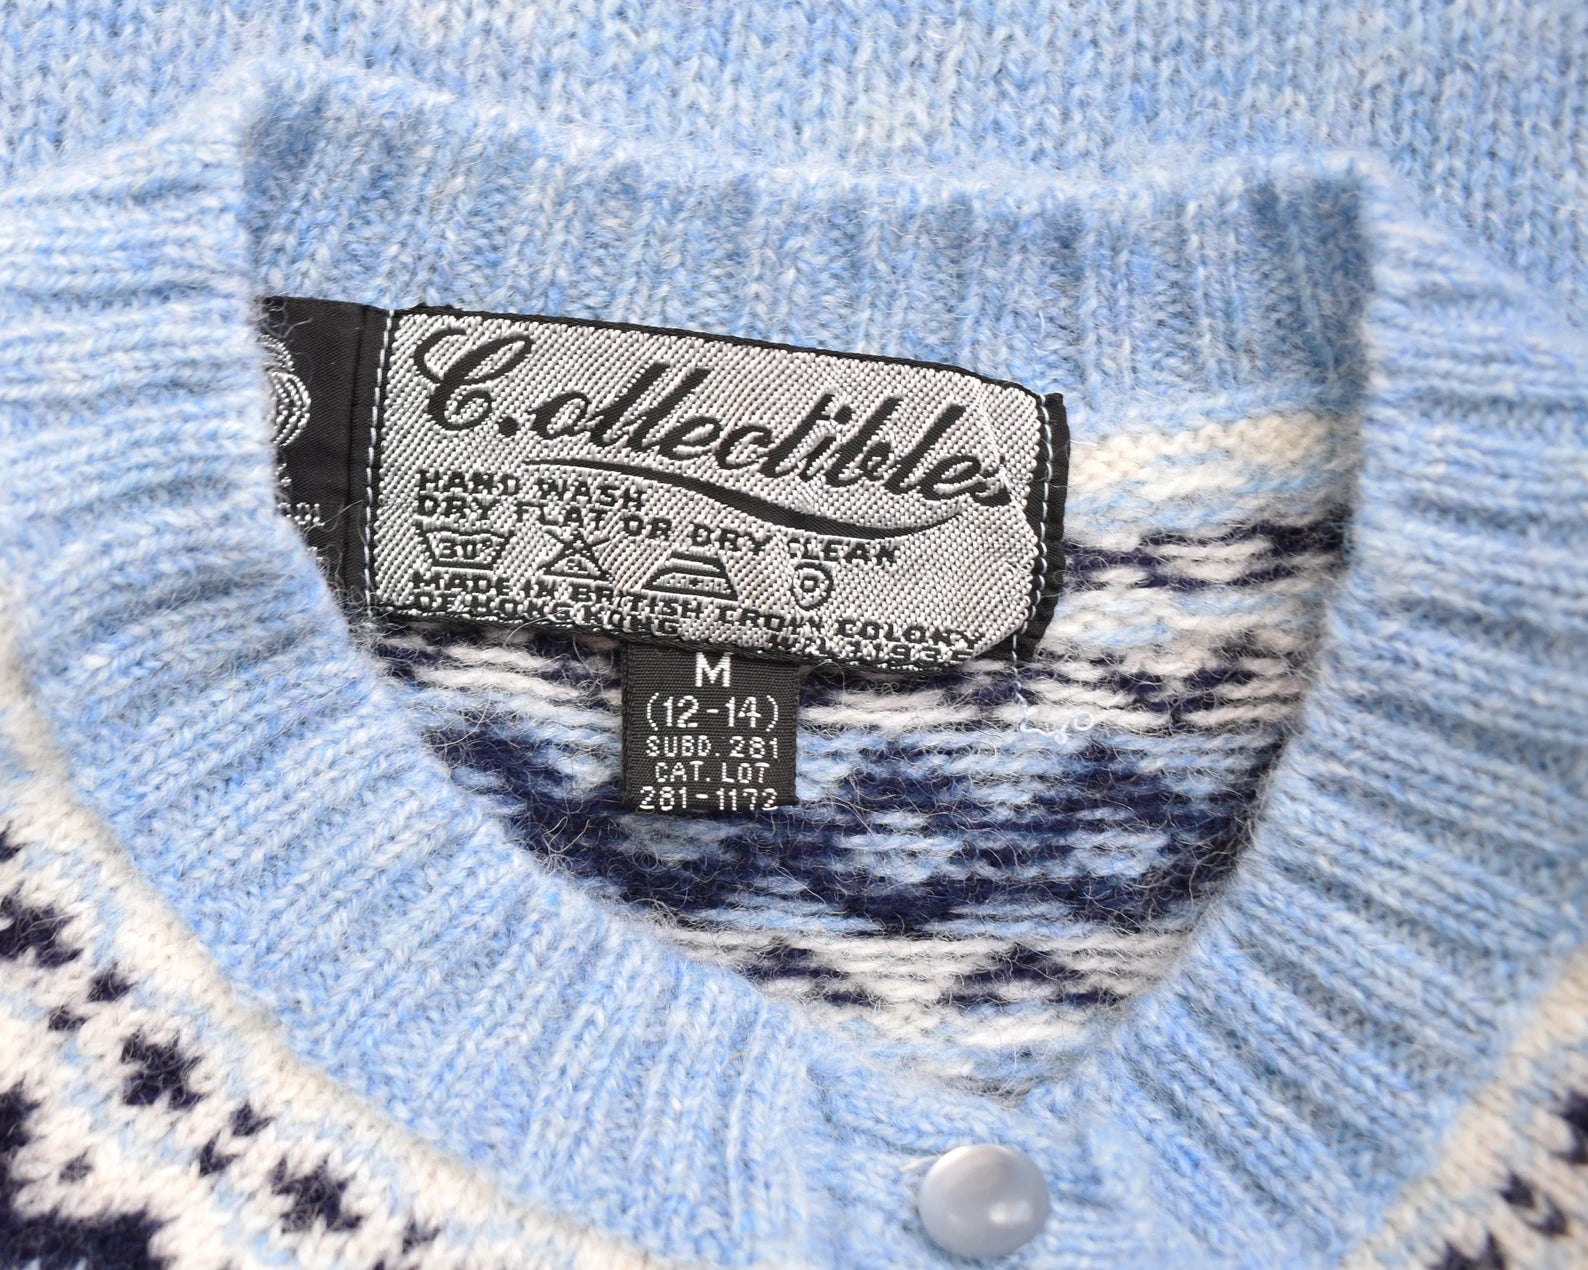 Close up of the tag which says C.ollectibles